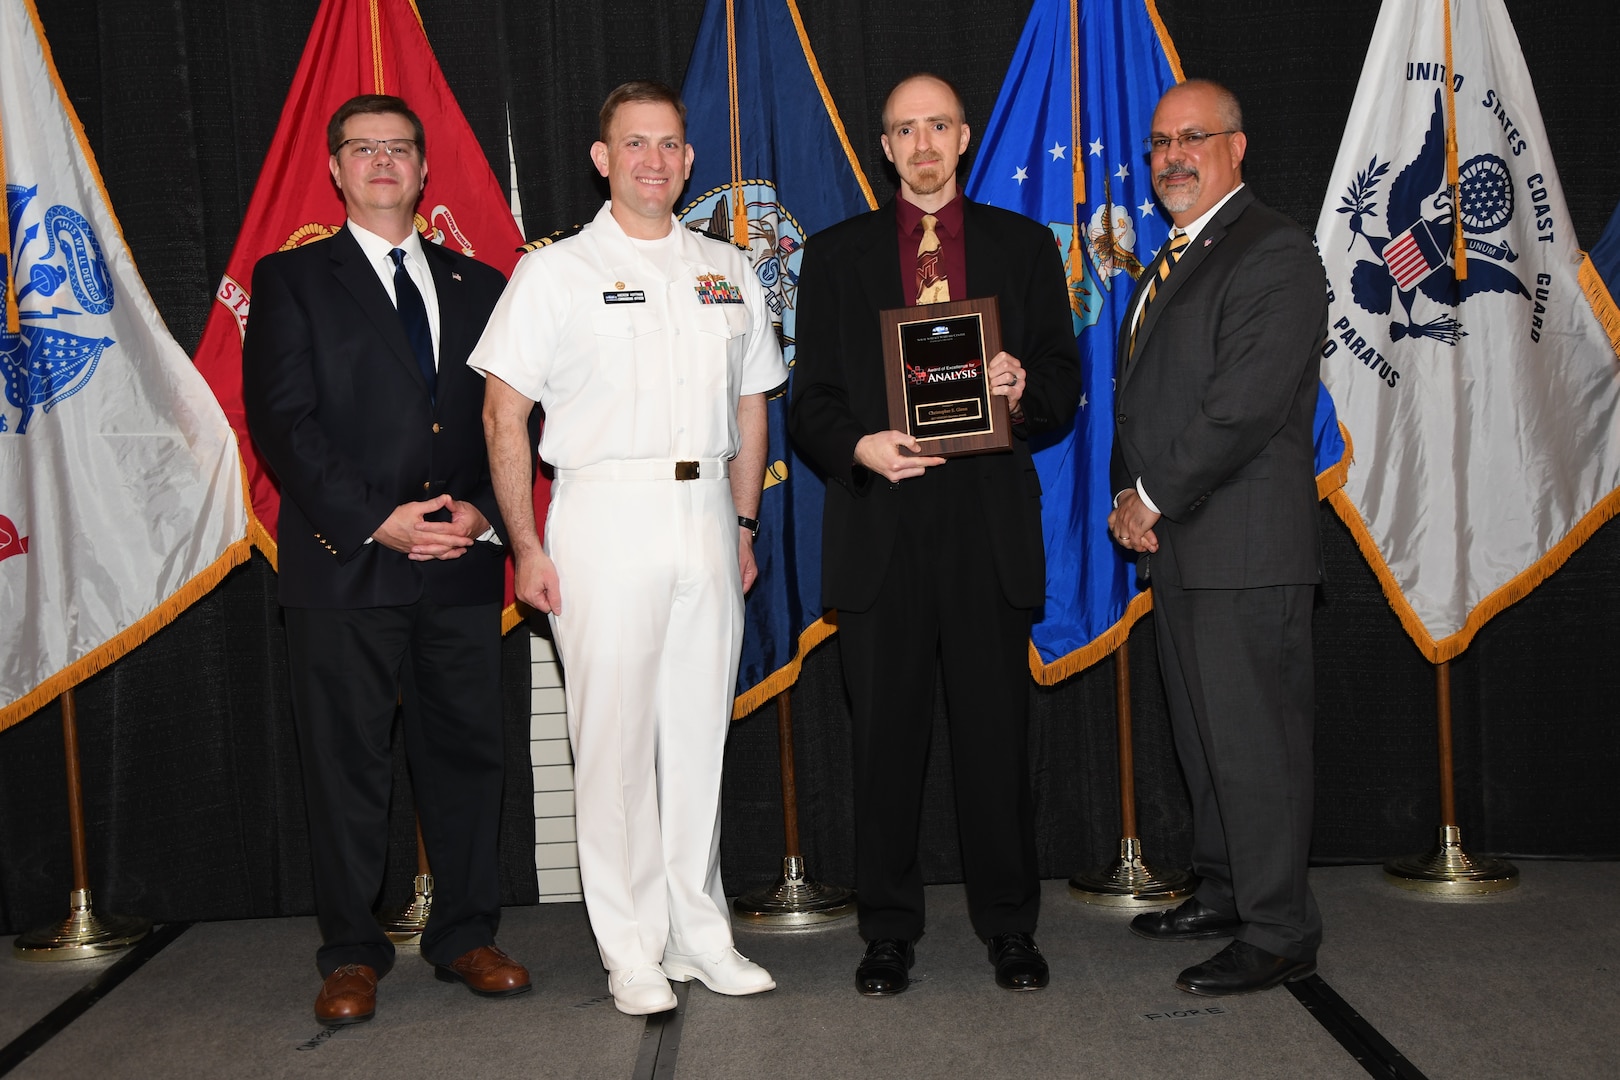 IMAGE: Christopher Glenn is presented the NSWCDD Award of Excellence for Analysis at Naval Surface Warfare Center Dahlgren Division's annual awards ceremony, Apr. 26 at the Fredericksburg Expo and Conference Center.

The NSWCDD Award of Excellence for Analysis is newly established to recognize individuals who have made a notable and significant impact to NSWCDD through their outstanding performance in analysis - warfare, design, engineering, modeling and simulation.